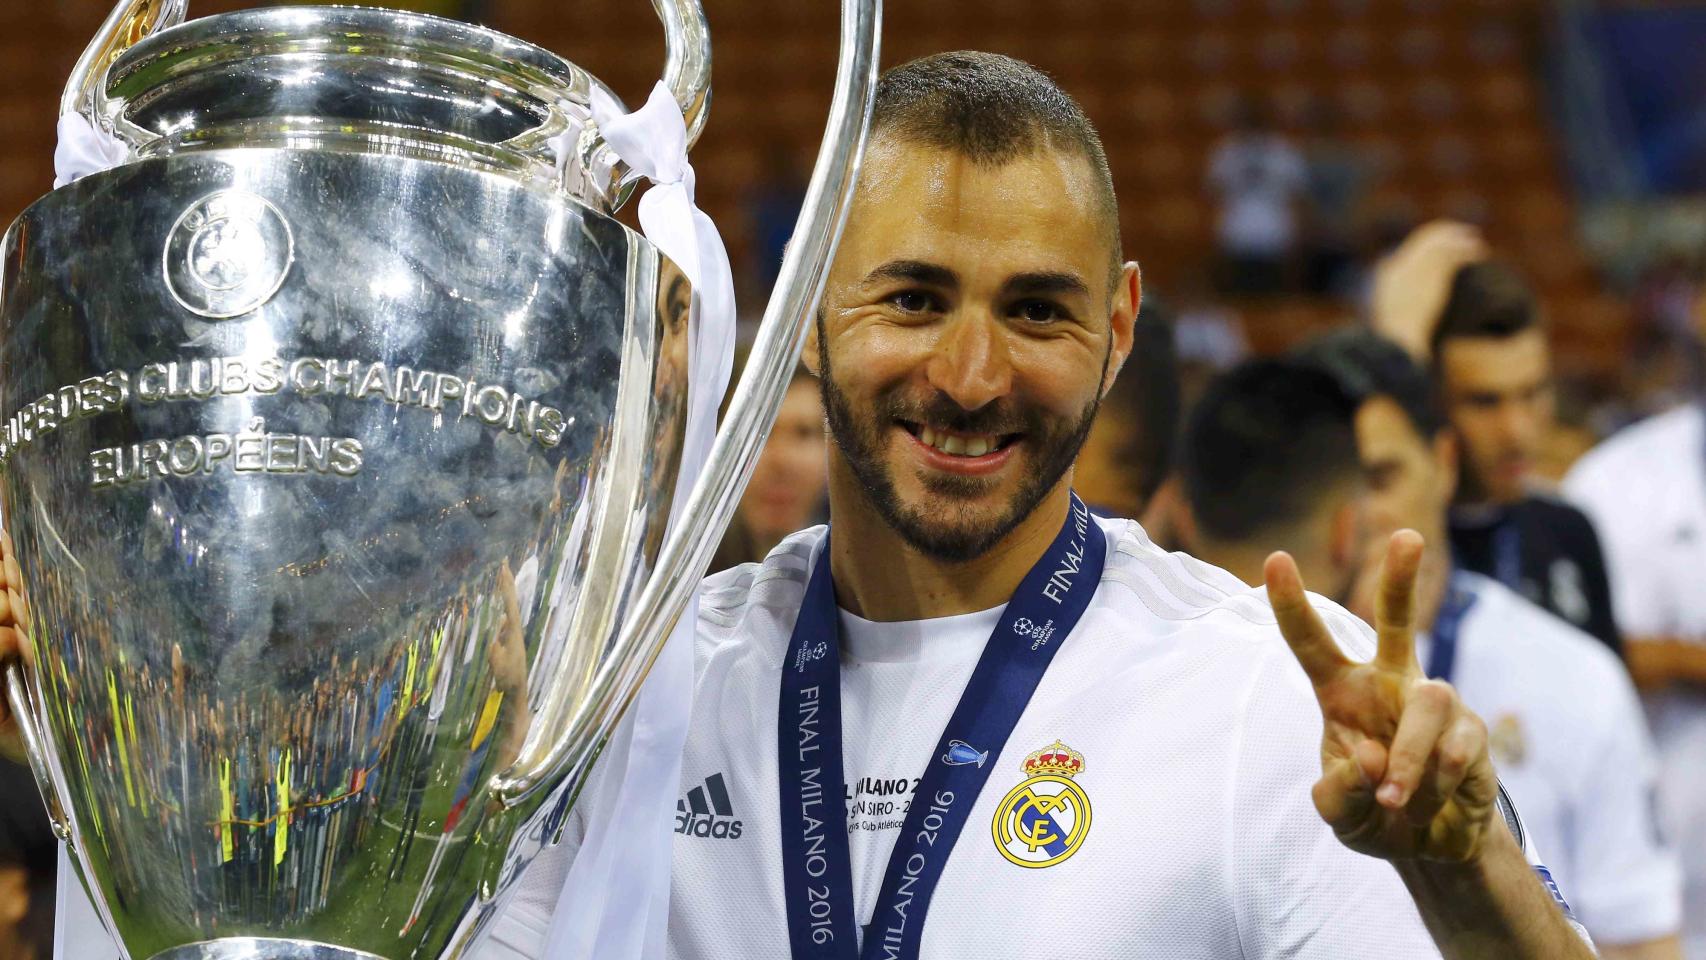 File photo of Real Madrid striker Karim Benzema with UEFA Champions League Cup